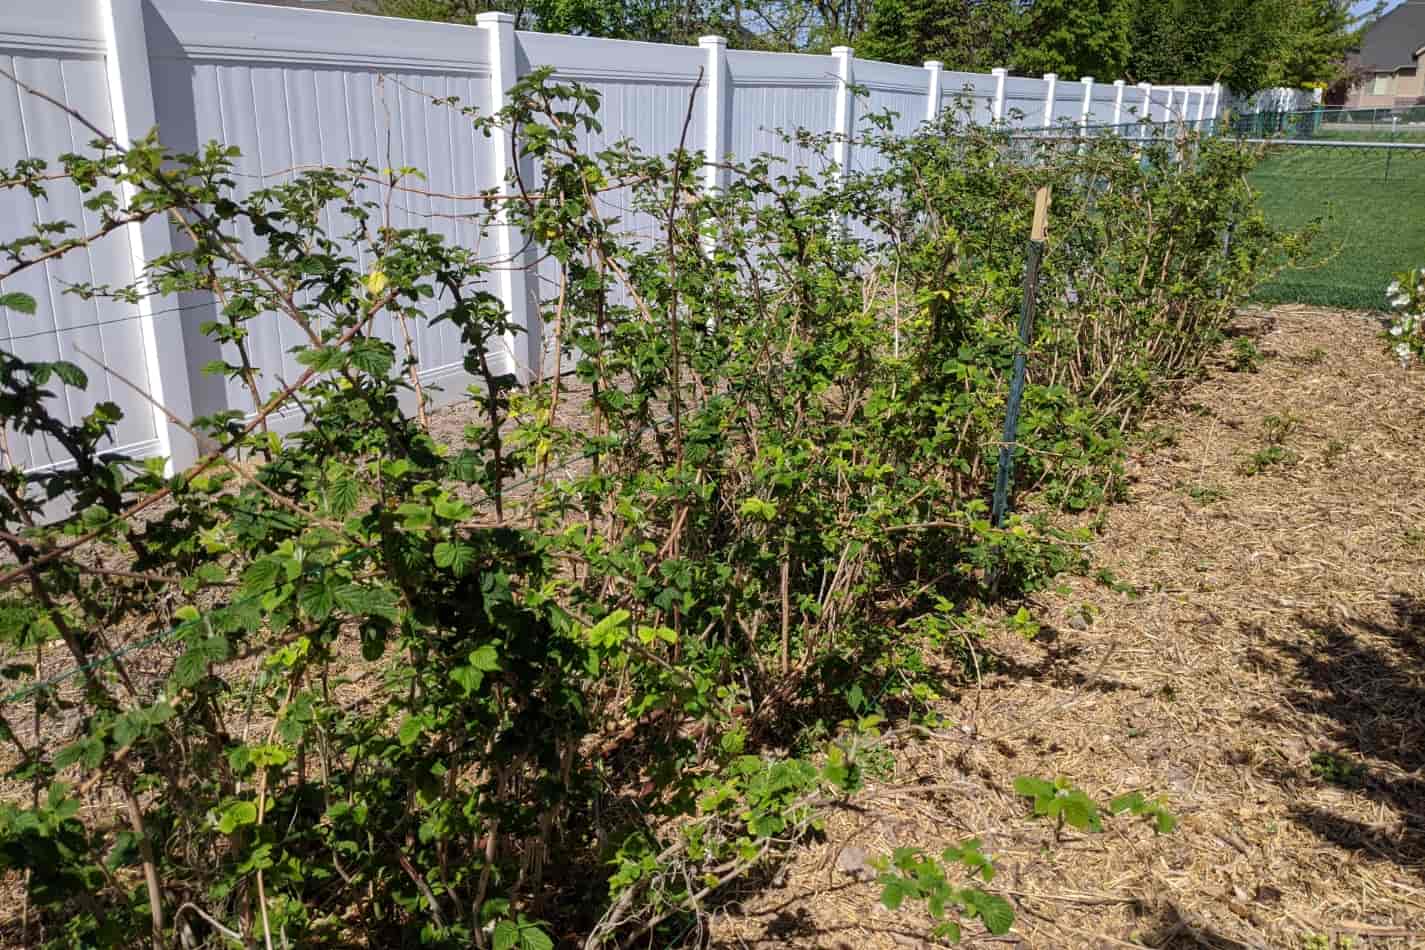 An image of our raspberries growing in our patch full of pollinators.